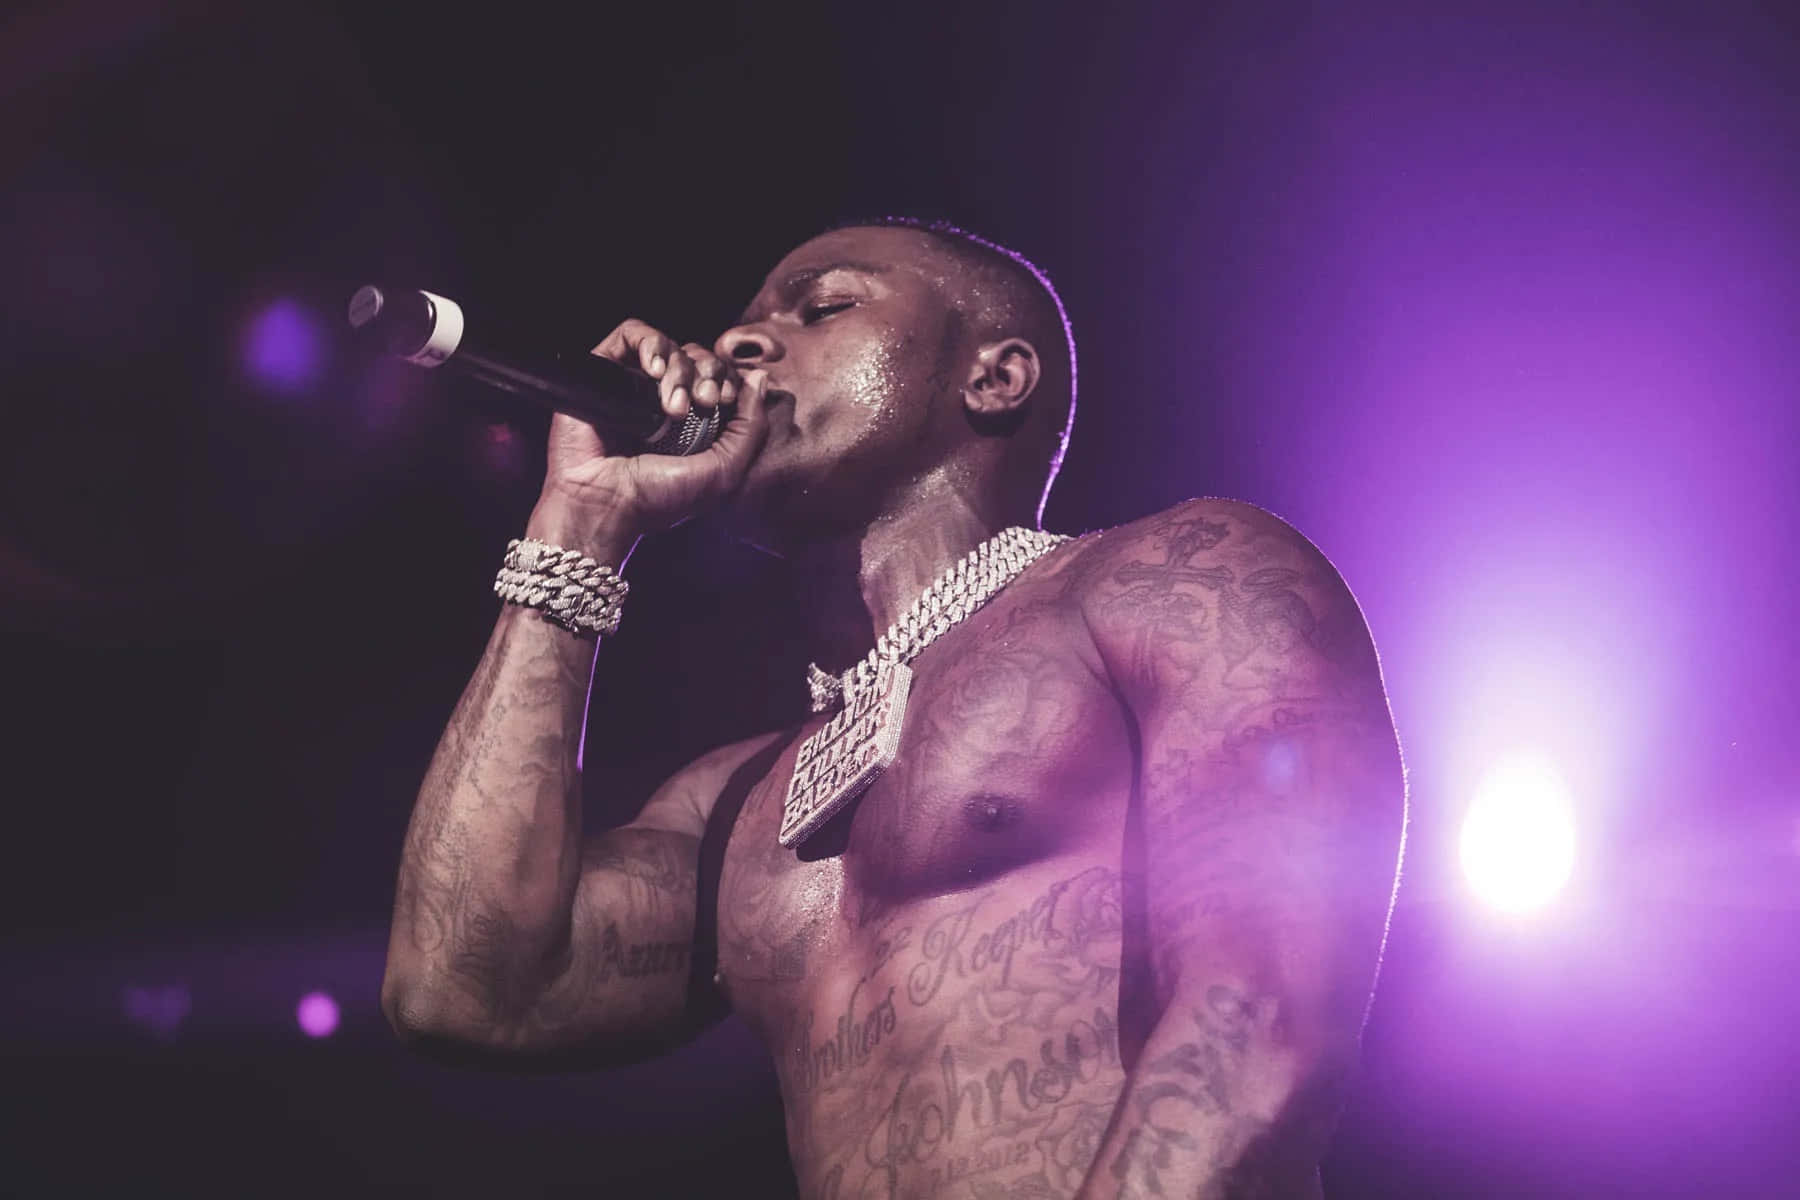 Download DaBaby performing live on stage in a custom outfit